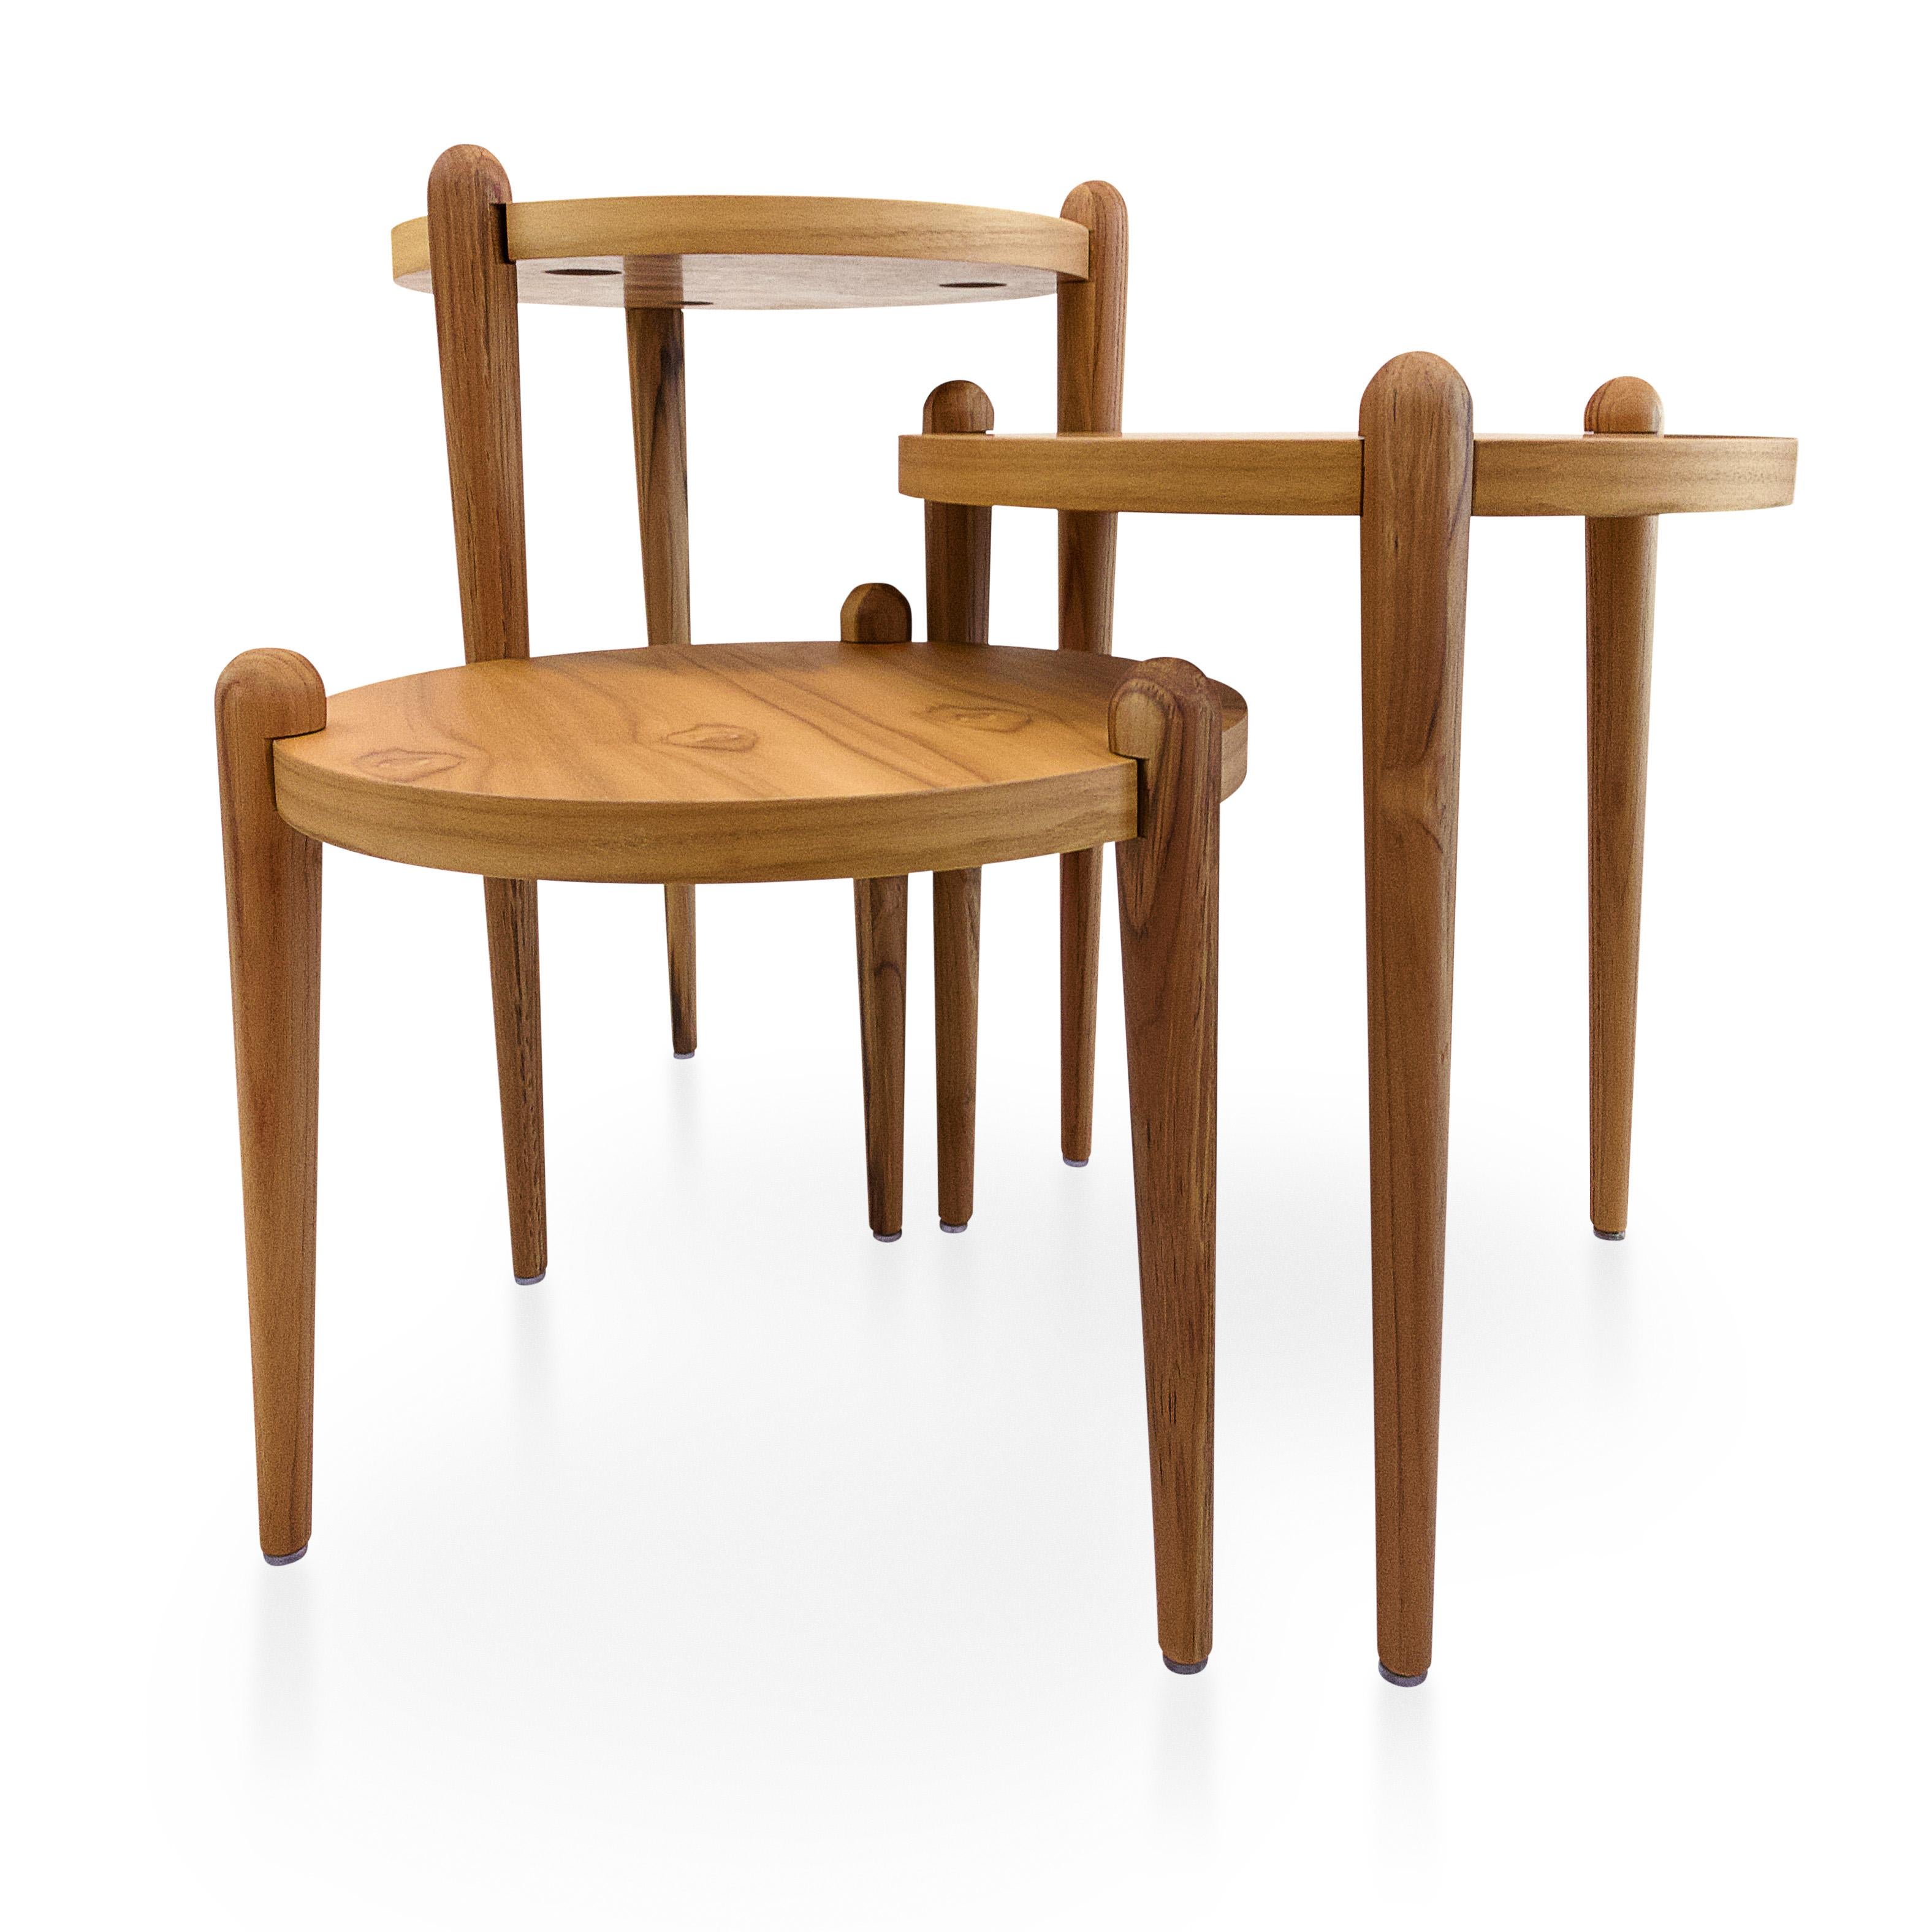 This beautiful set created by our amazing Uultis design team is a set of three occasional tables in a teak wood finish with cone-shaped feet that gives a retro touch providing a sophisticated style that you will not regret having in your house. This